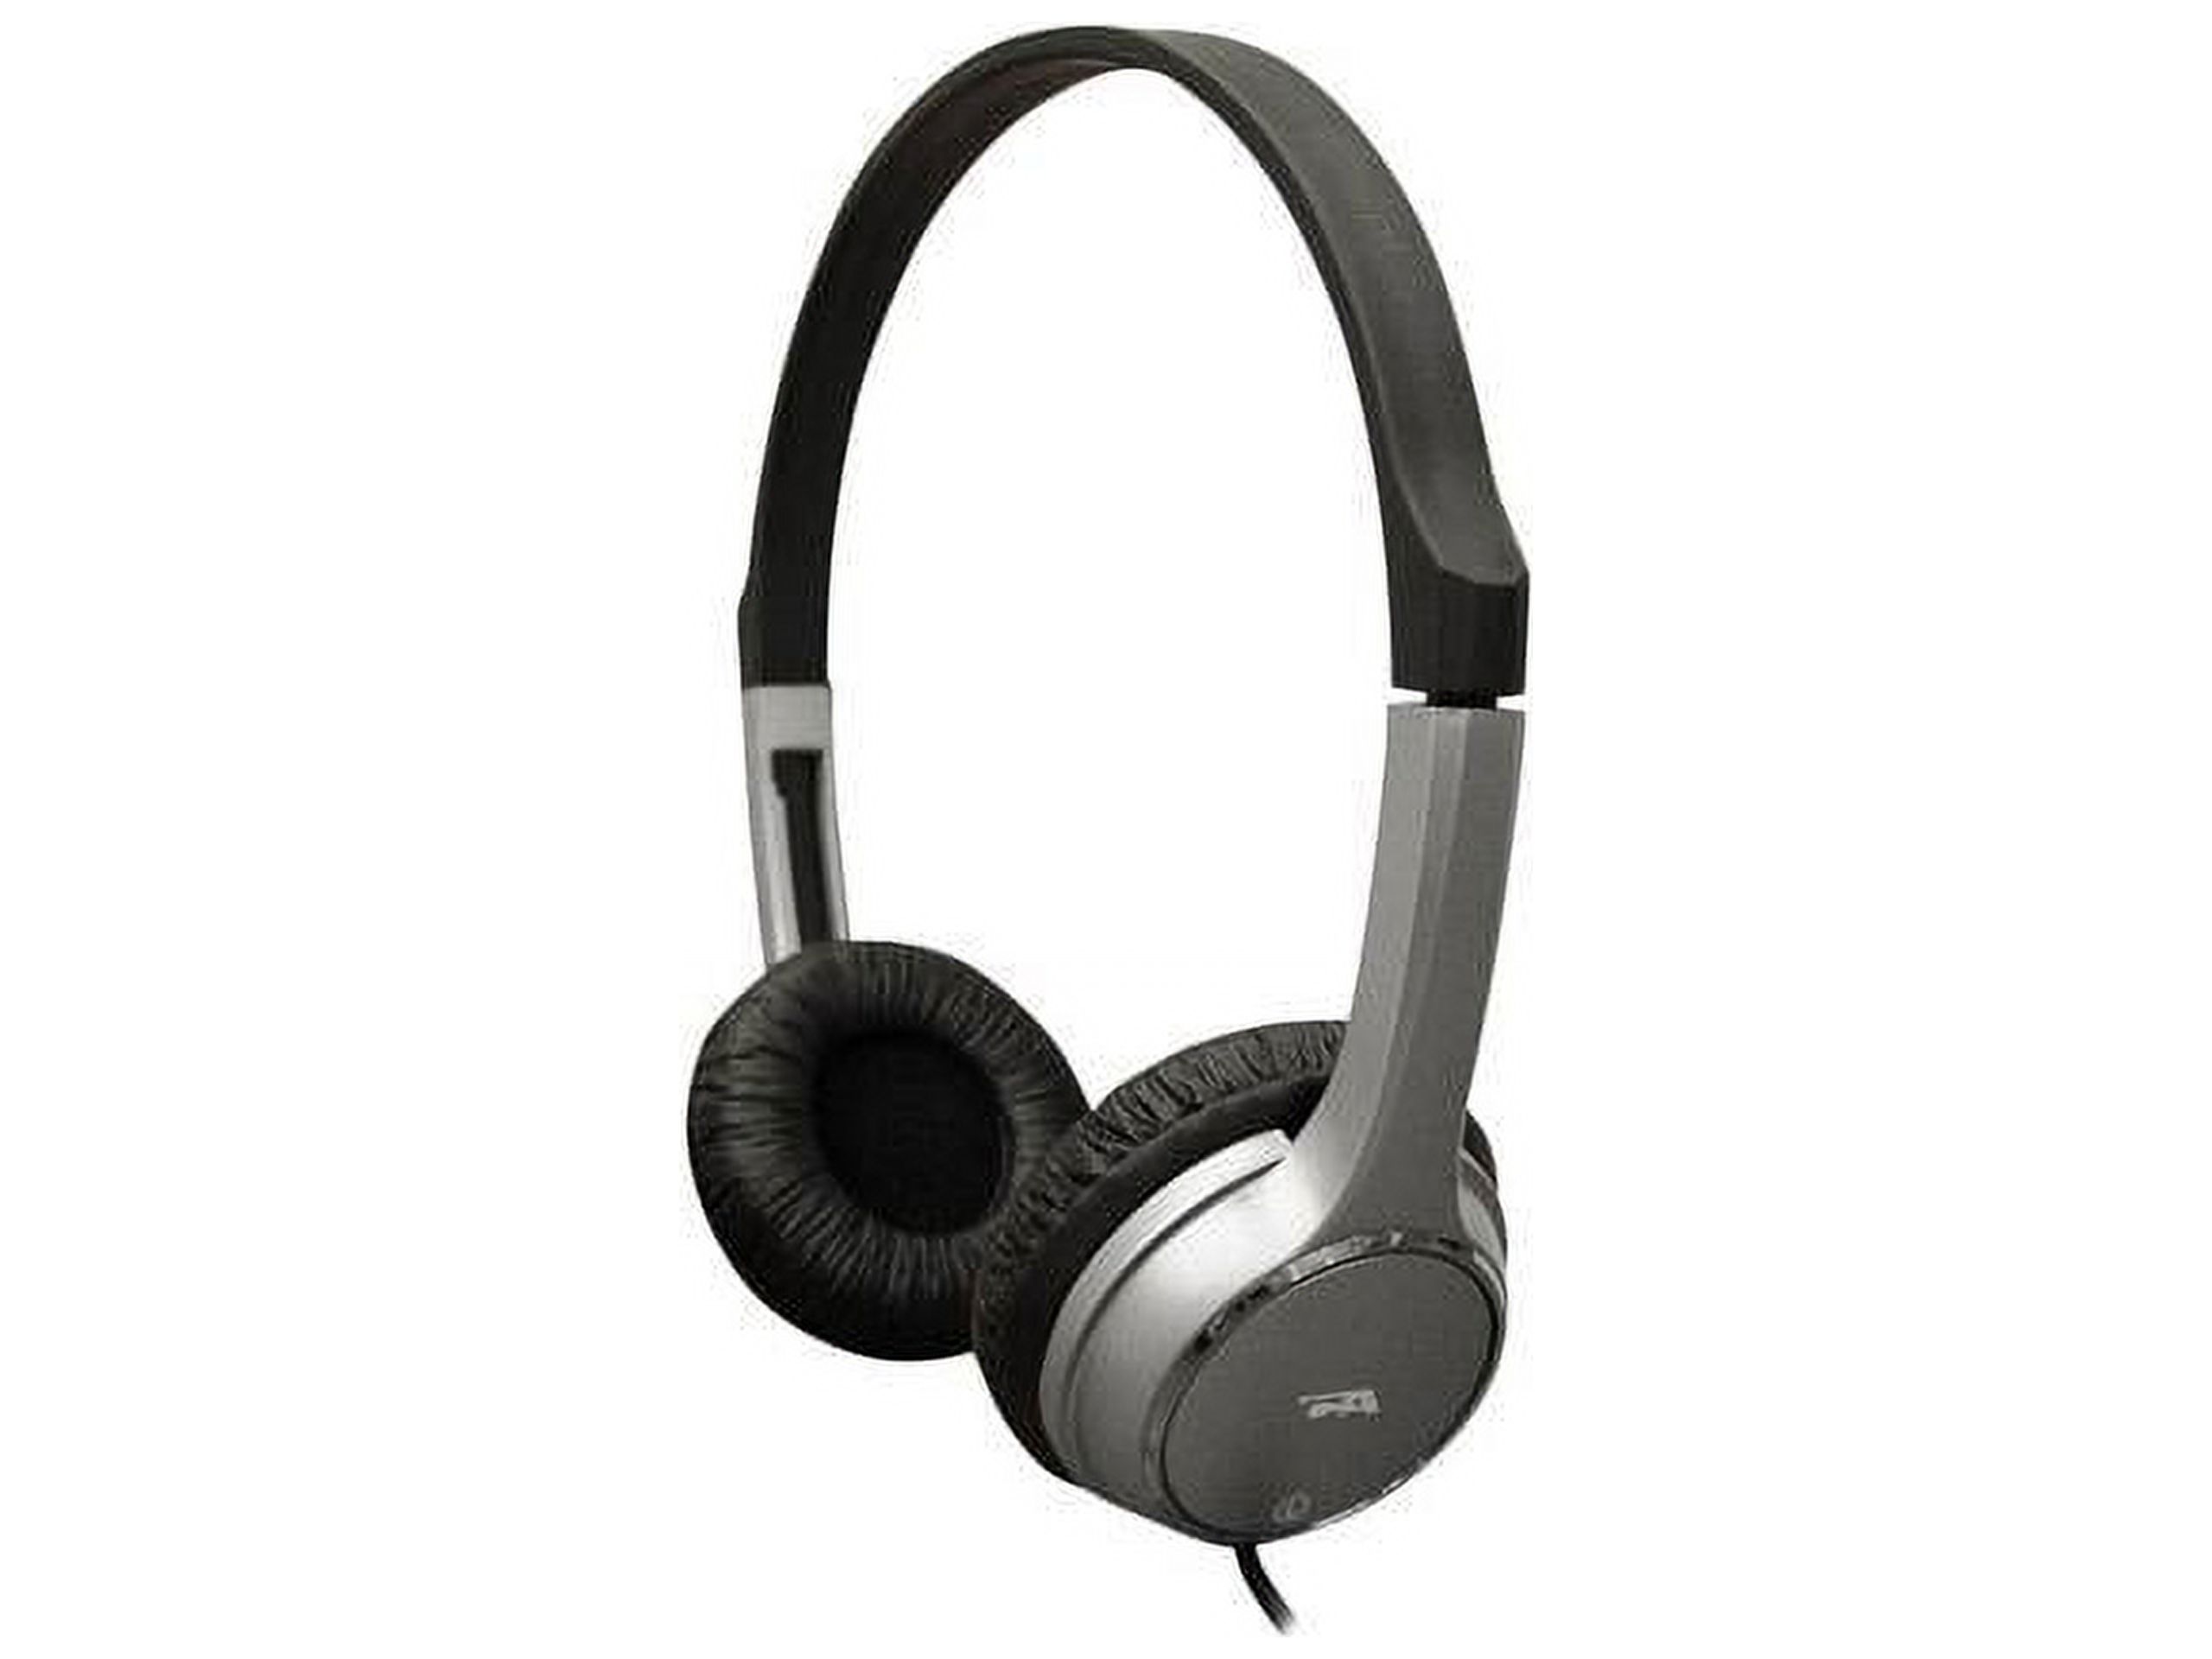 Cyber Acoustics Stereo Headphones for Kids, Gray - image 1 of 2